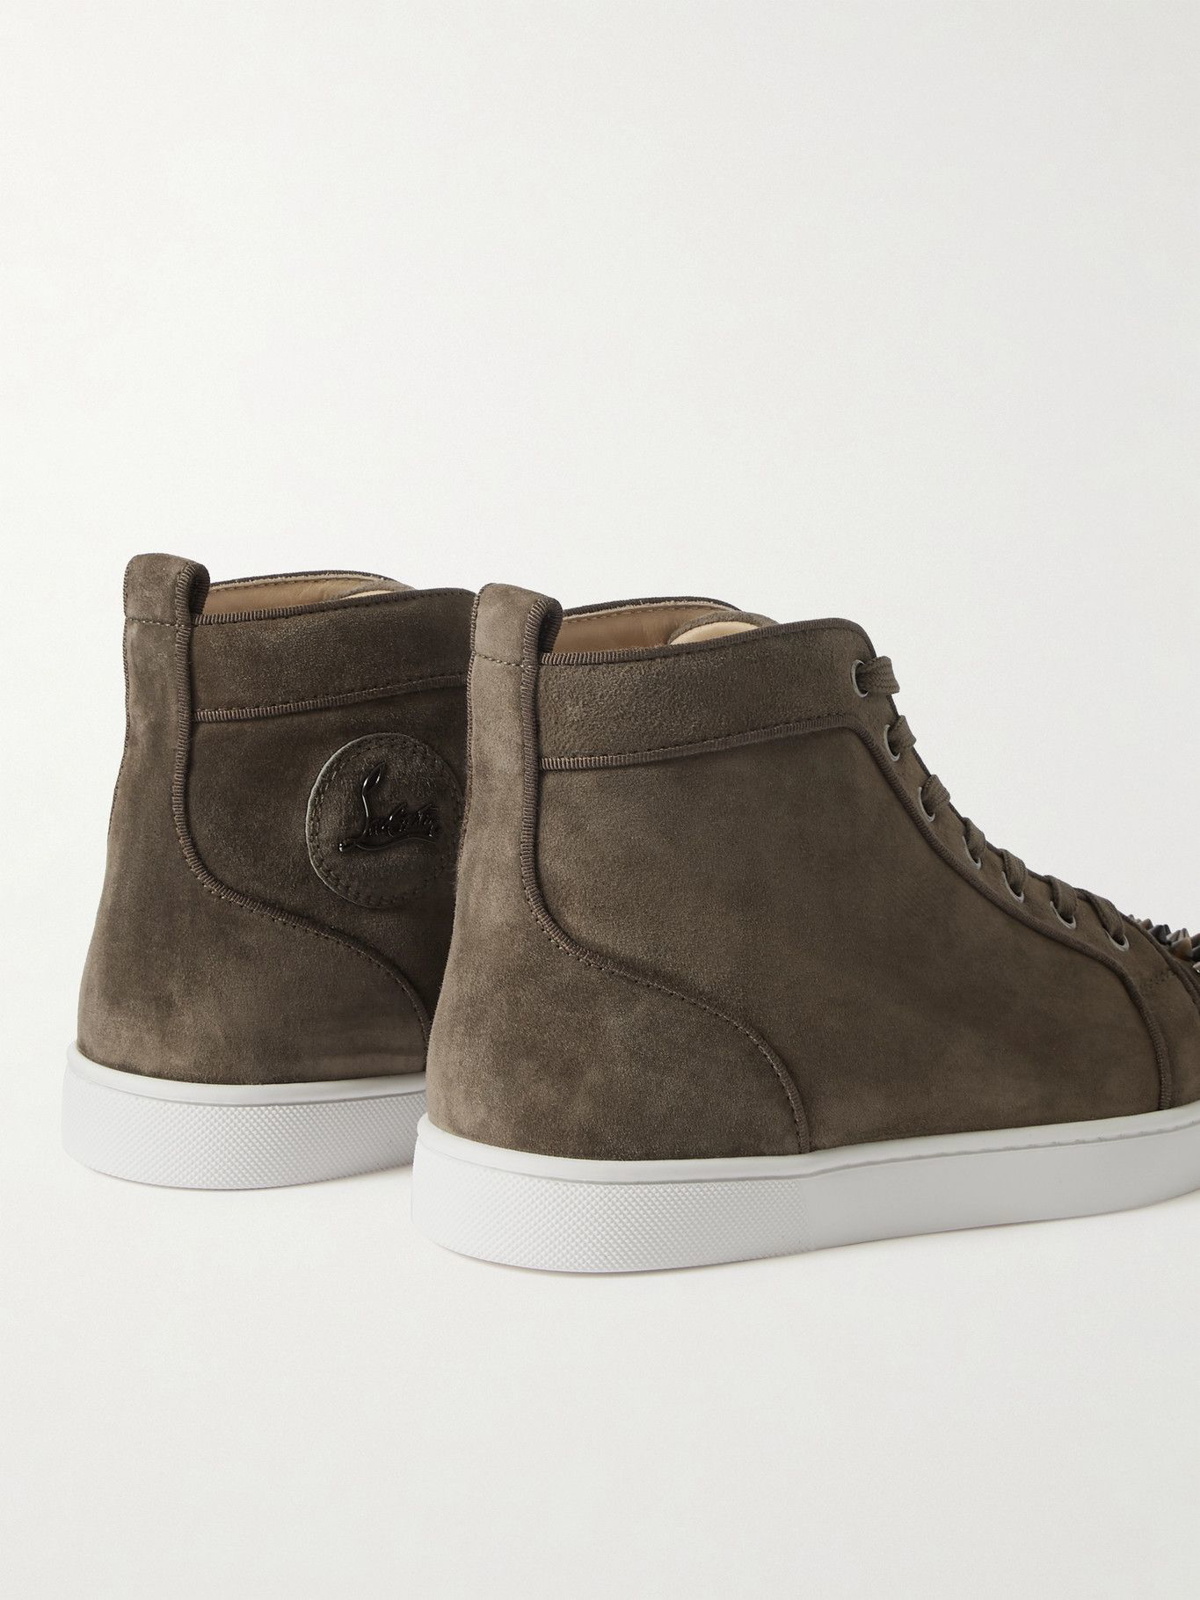 Louis Spikes Suede High Top Sneakers in Brown - Christian